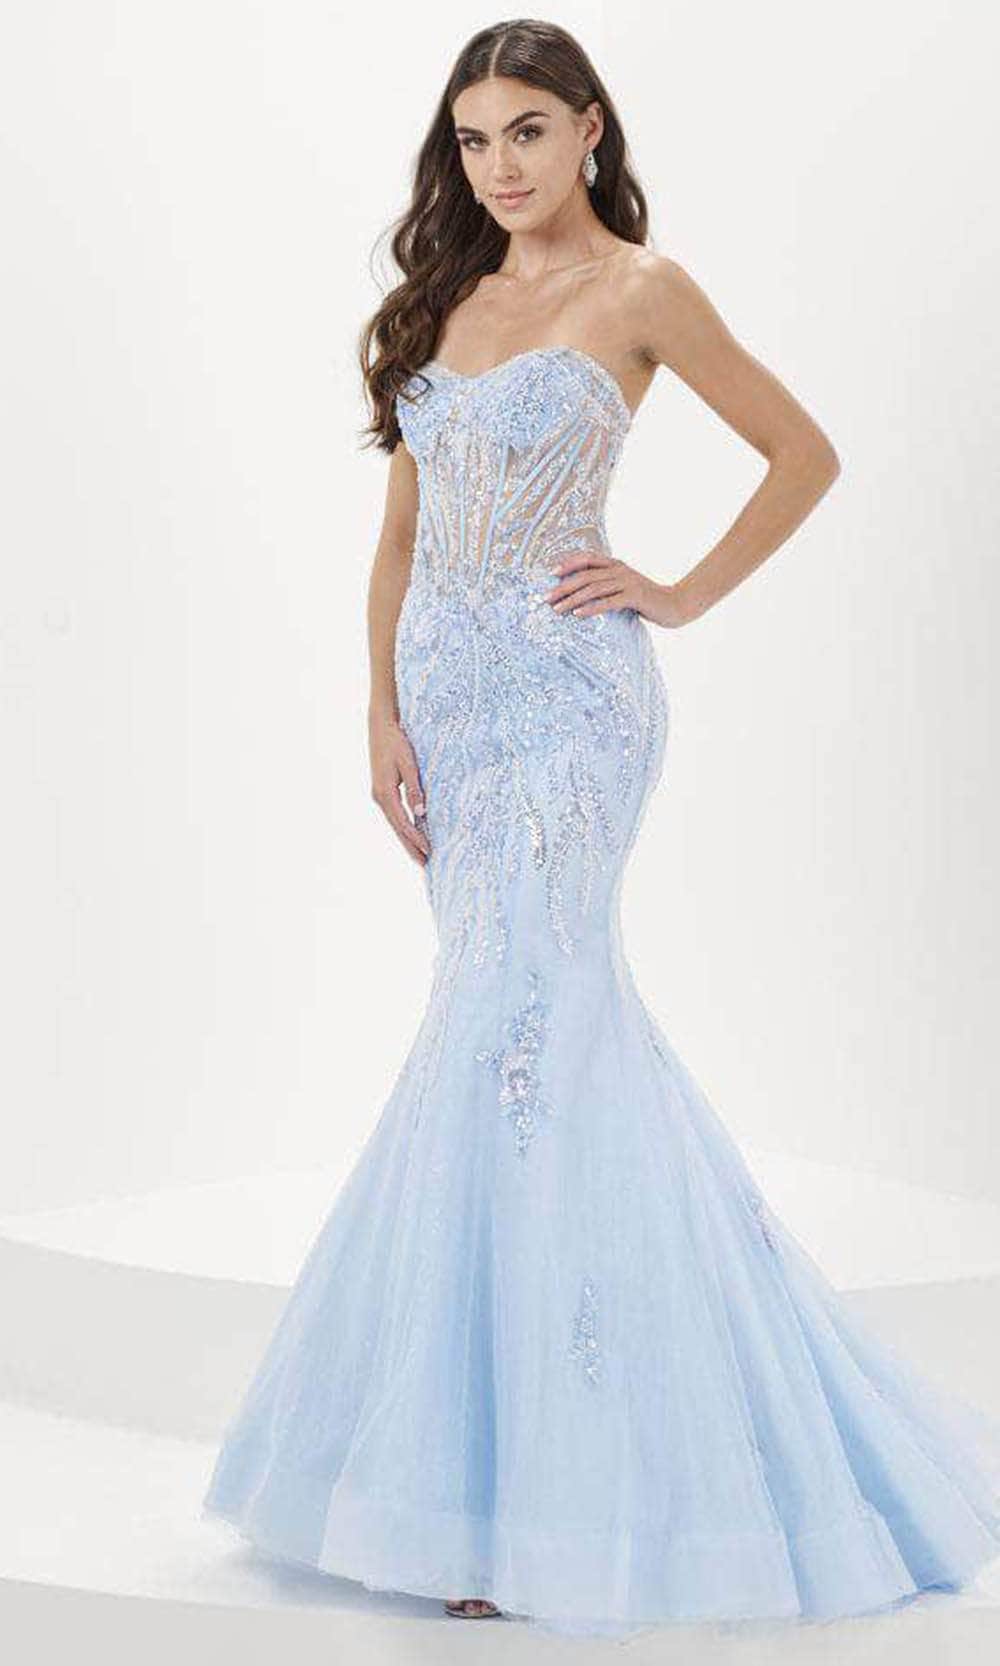 Tiffany Designs 16074 - Floral Beaded Mermaid Evening Gown
